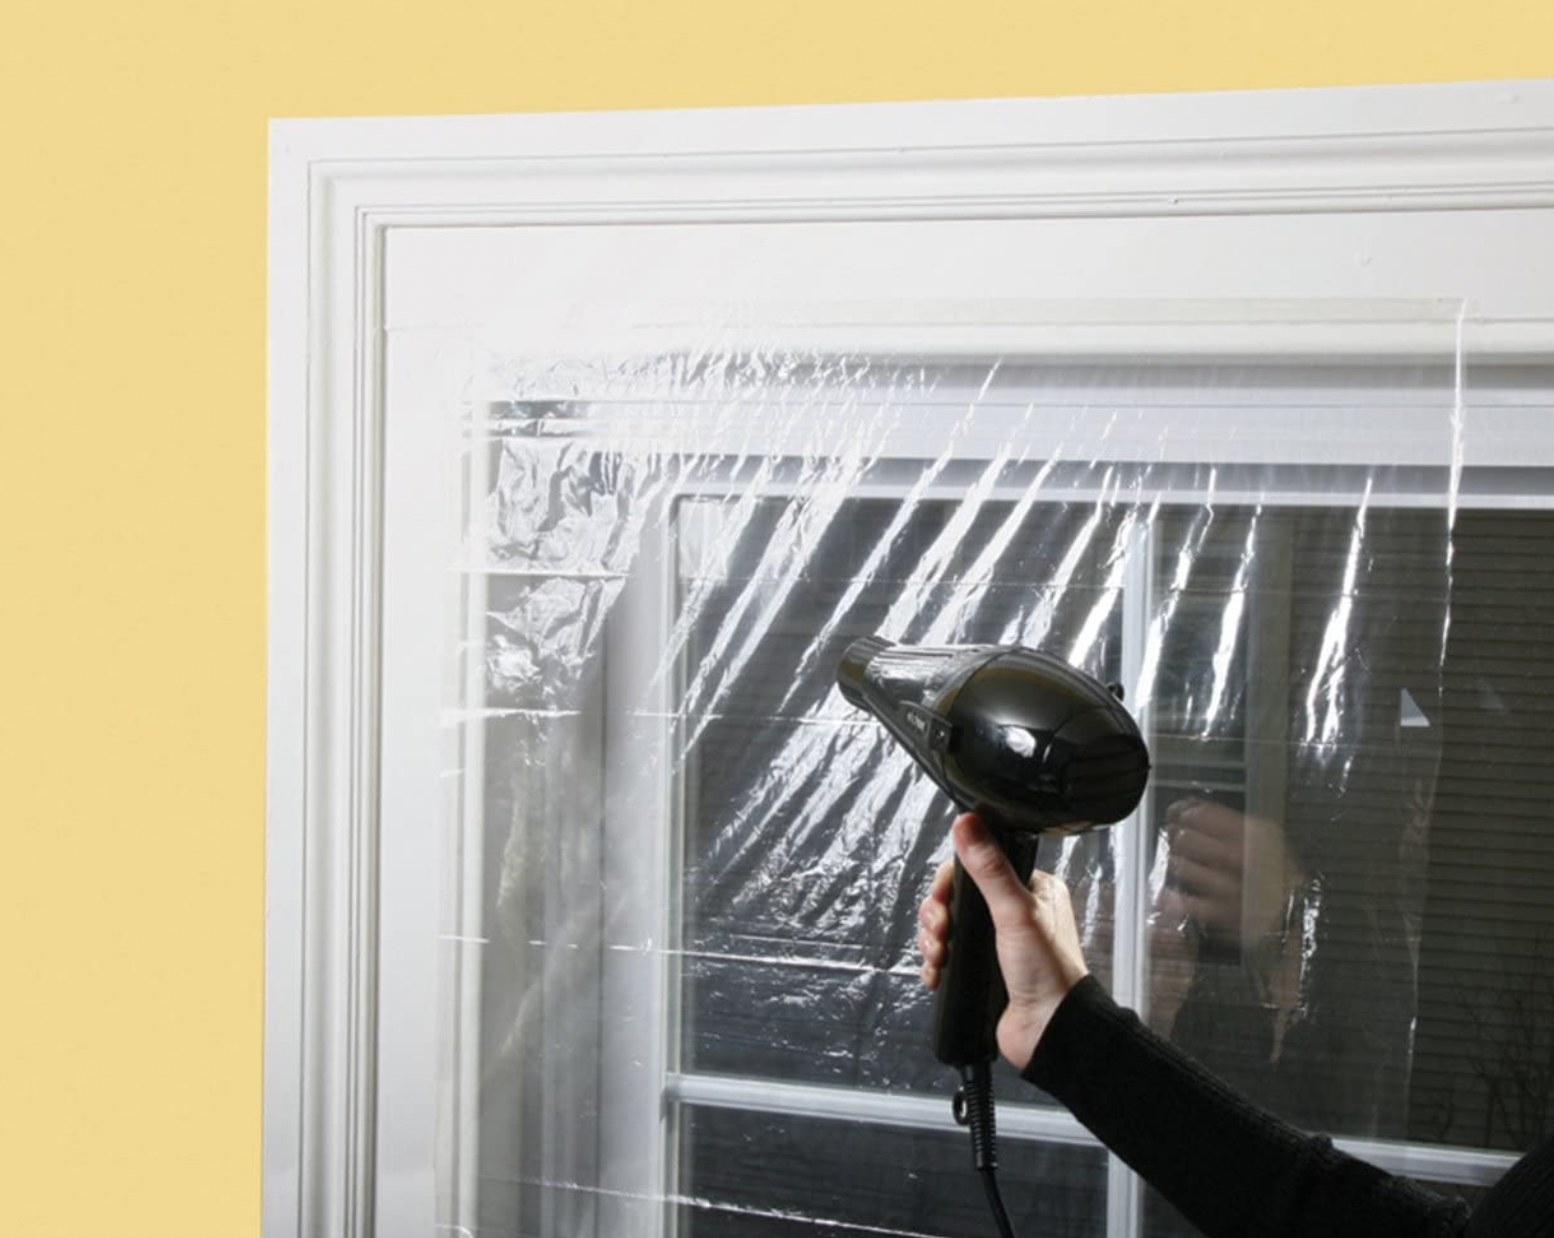 A hair dryer being used to seal the plastic wrap treatment over a window